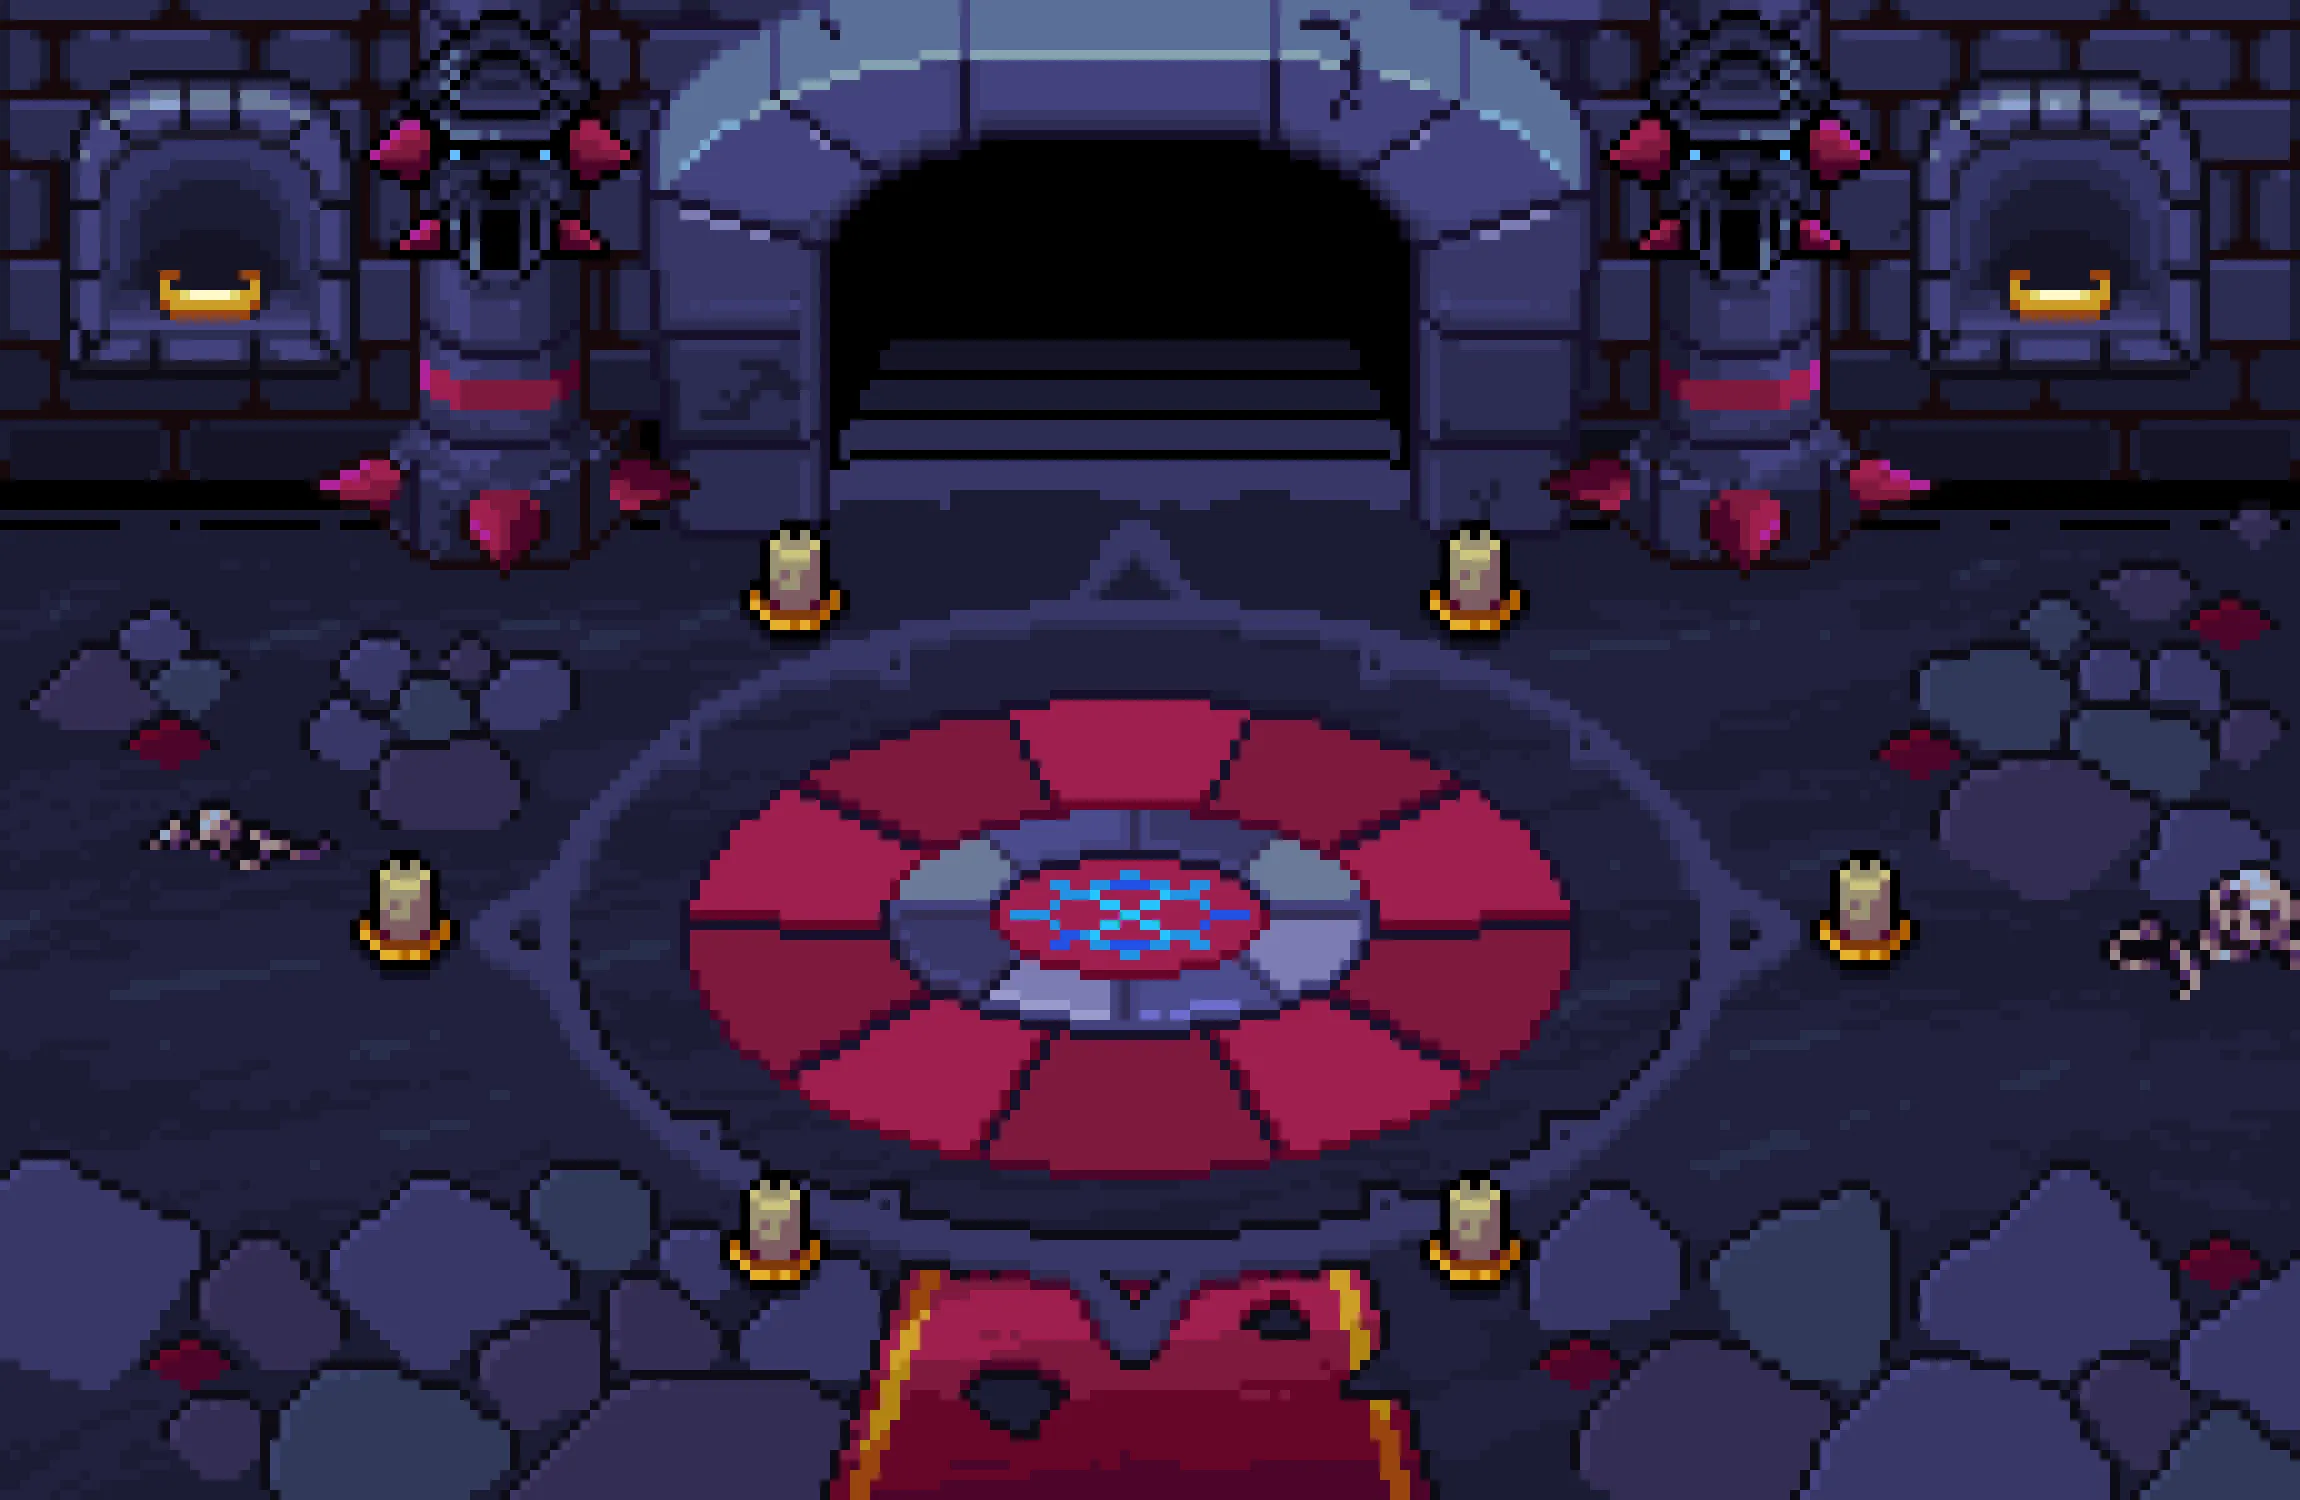 The photo displays the entrance of a dark dungeon in Crypto Raiders, where players can encounter enemies to obtain new materials and resources.